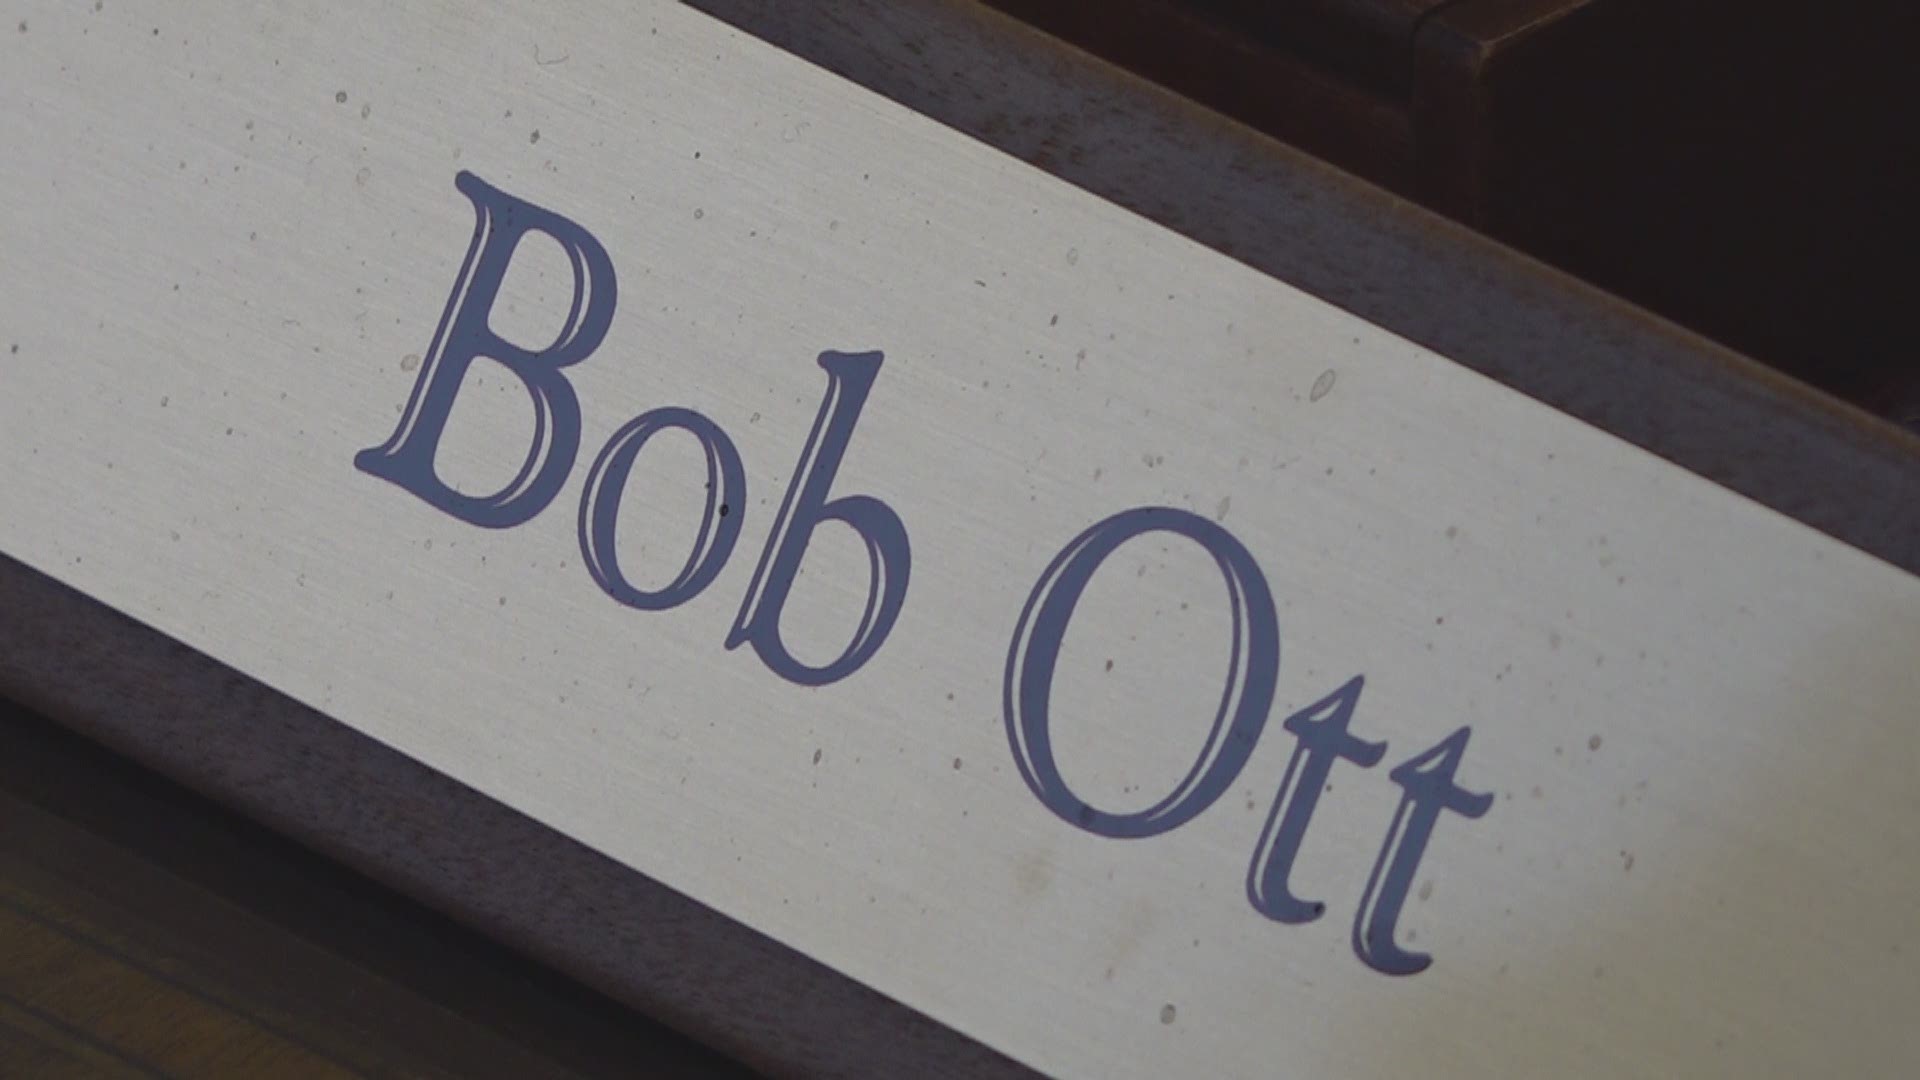 Cobb County District 2 Commissioner Bob Ott will not campaign for a 4th term, saying he’s preparing for retirement.